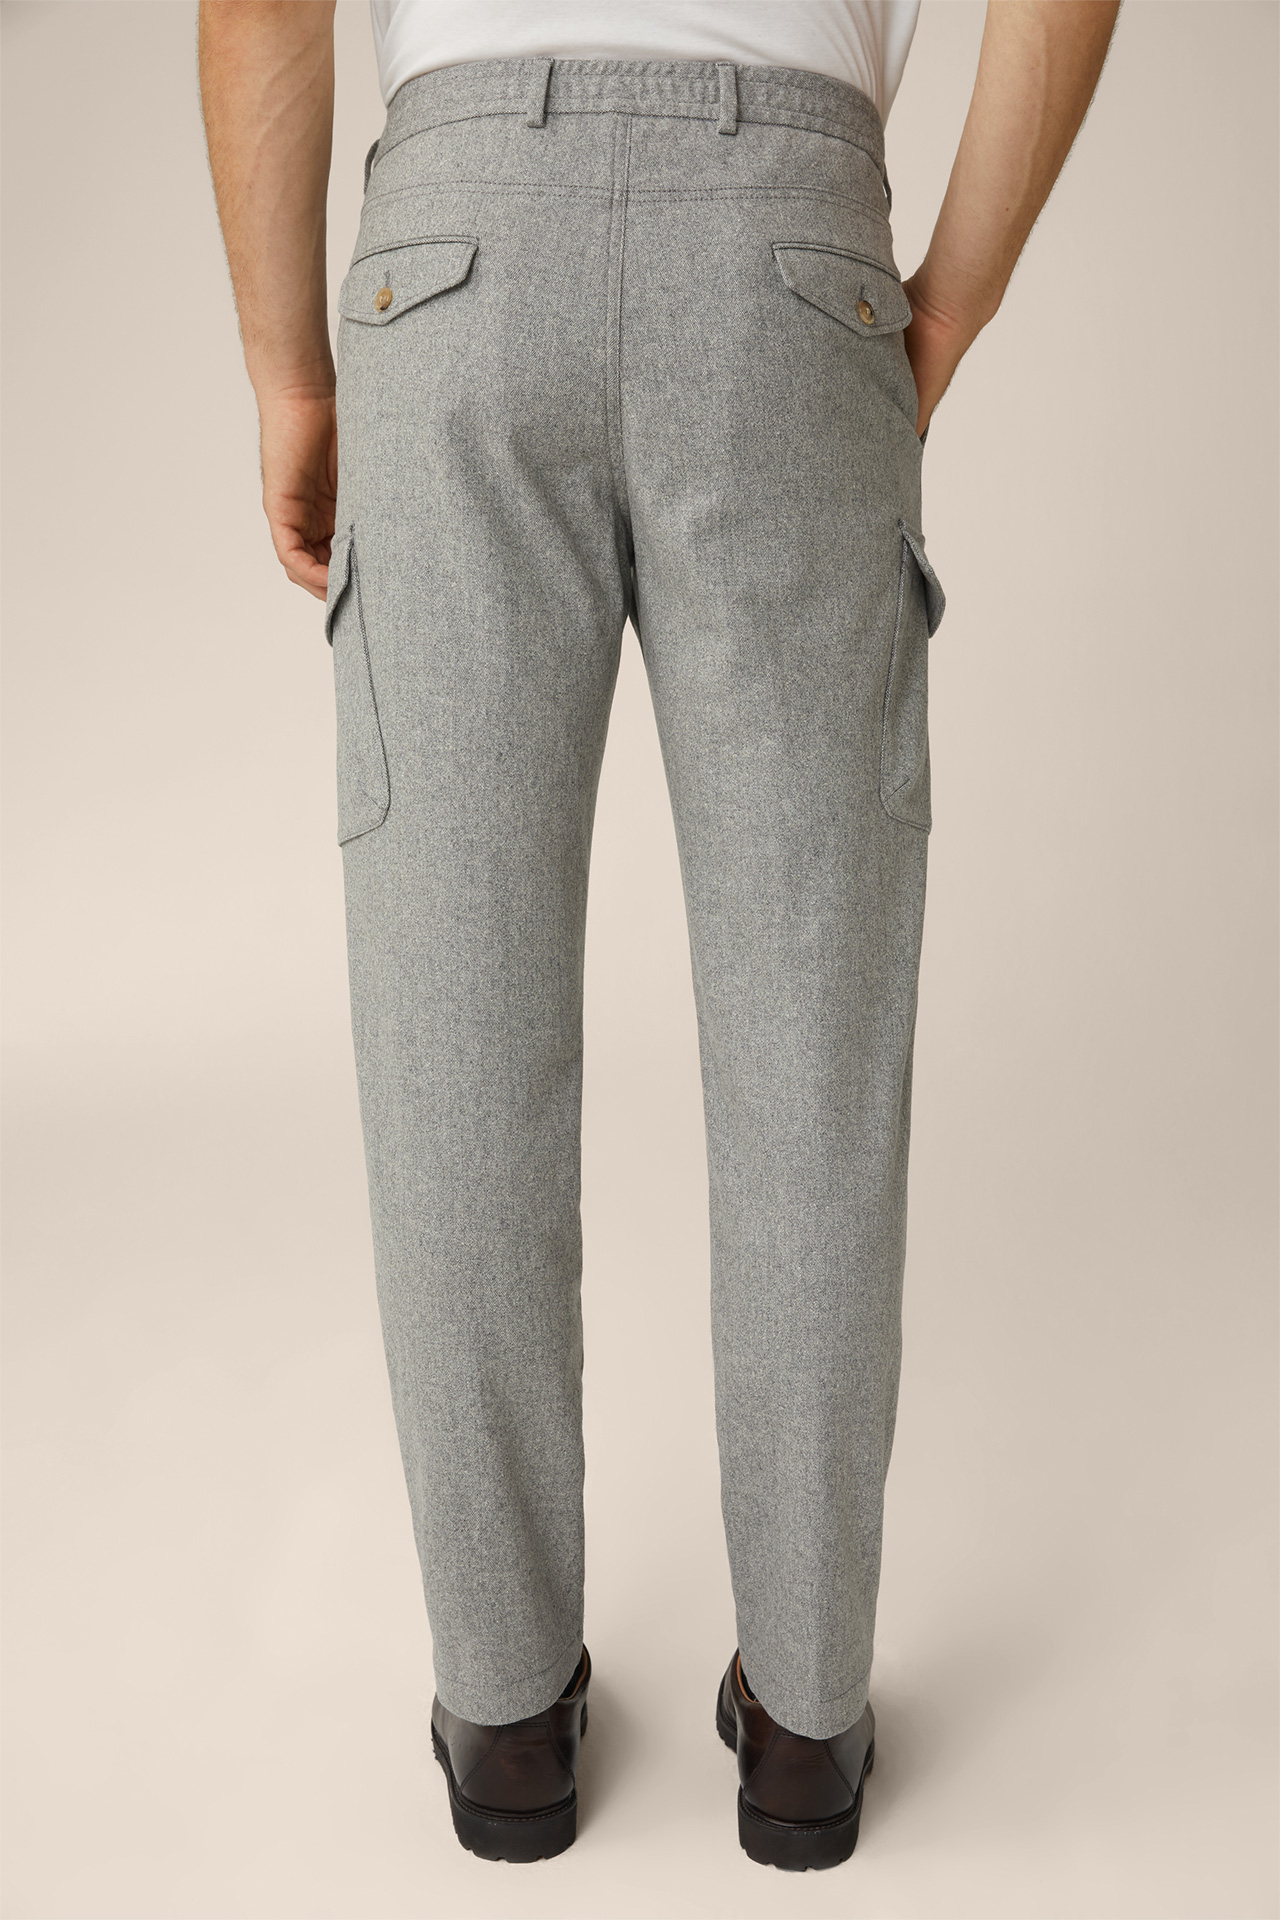 Wool Blend Famo Pleated Cargo Trousers in Grey Melange with Cashmere